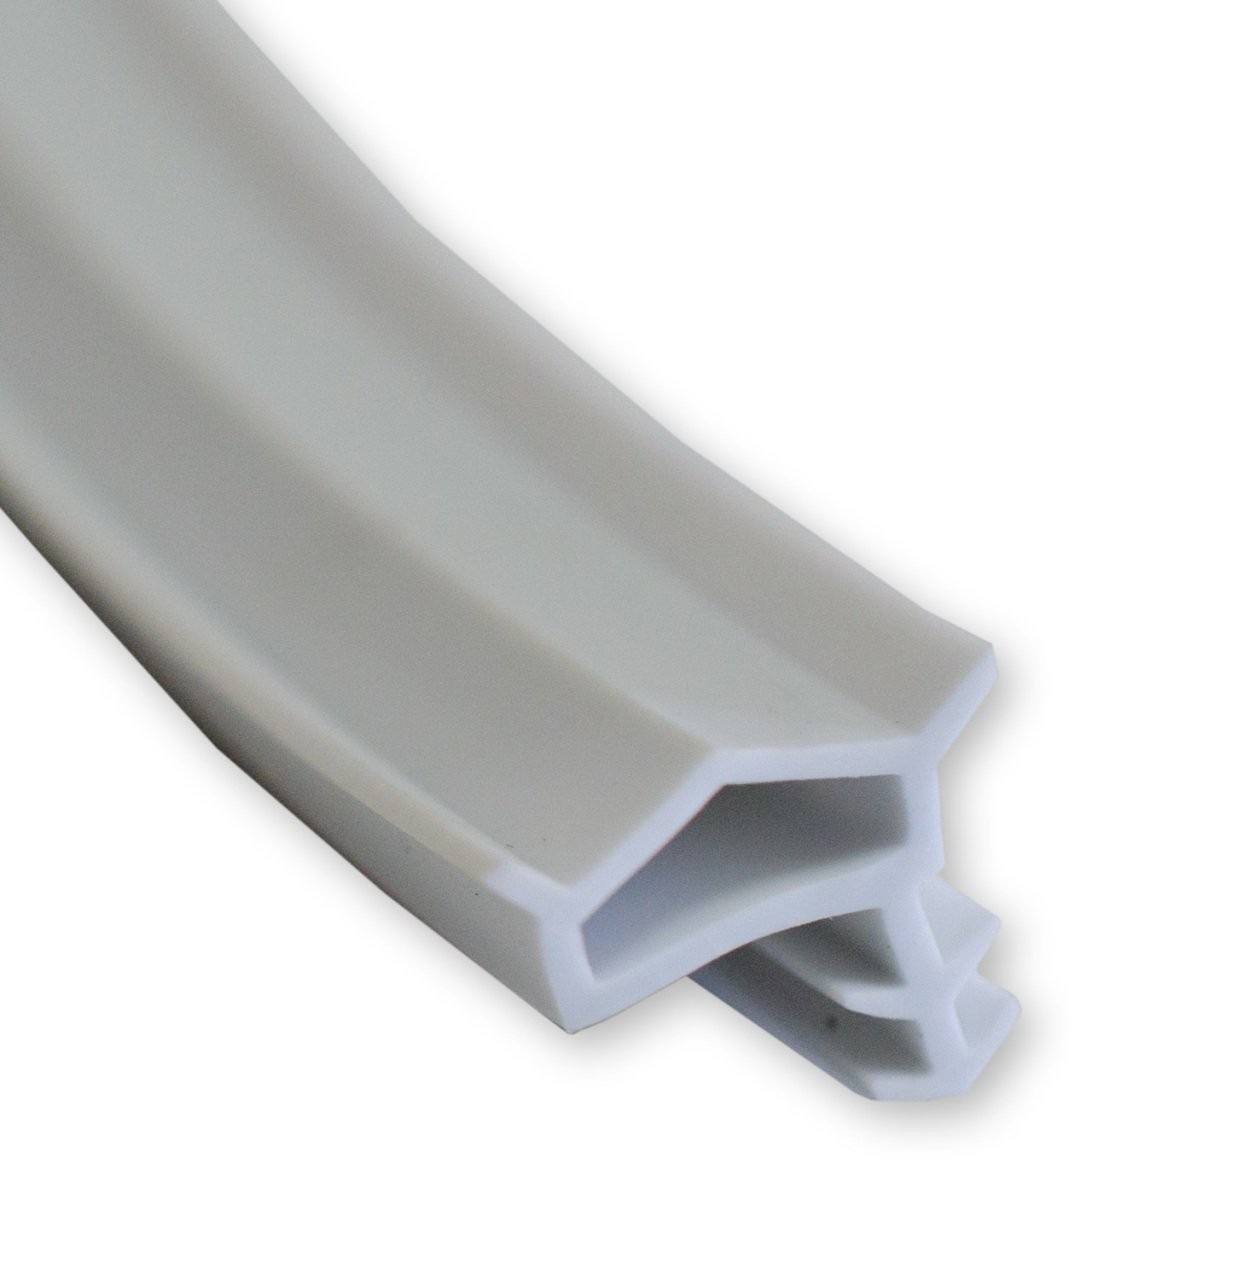 Soft PVC Door Frame Seal Strip, Pyramid Shape with Side Nails and Double Ears, Gray, 100 meters